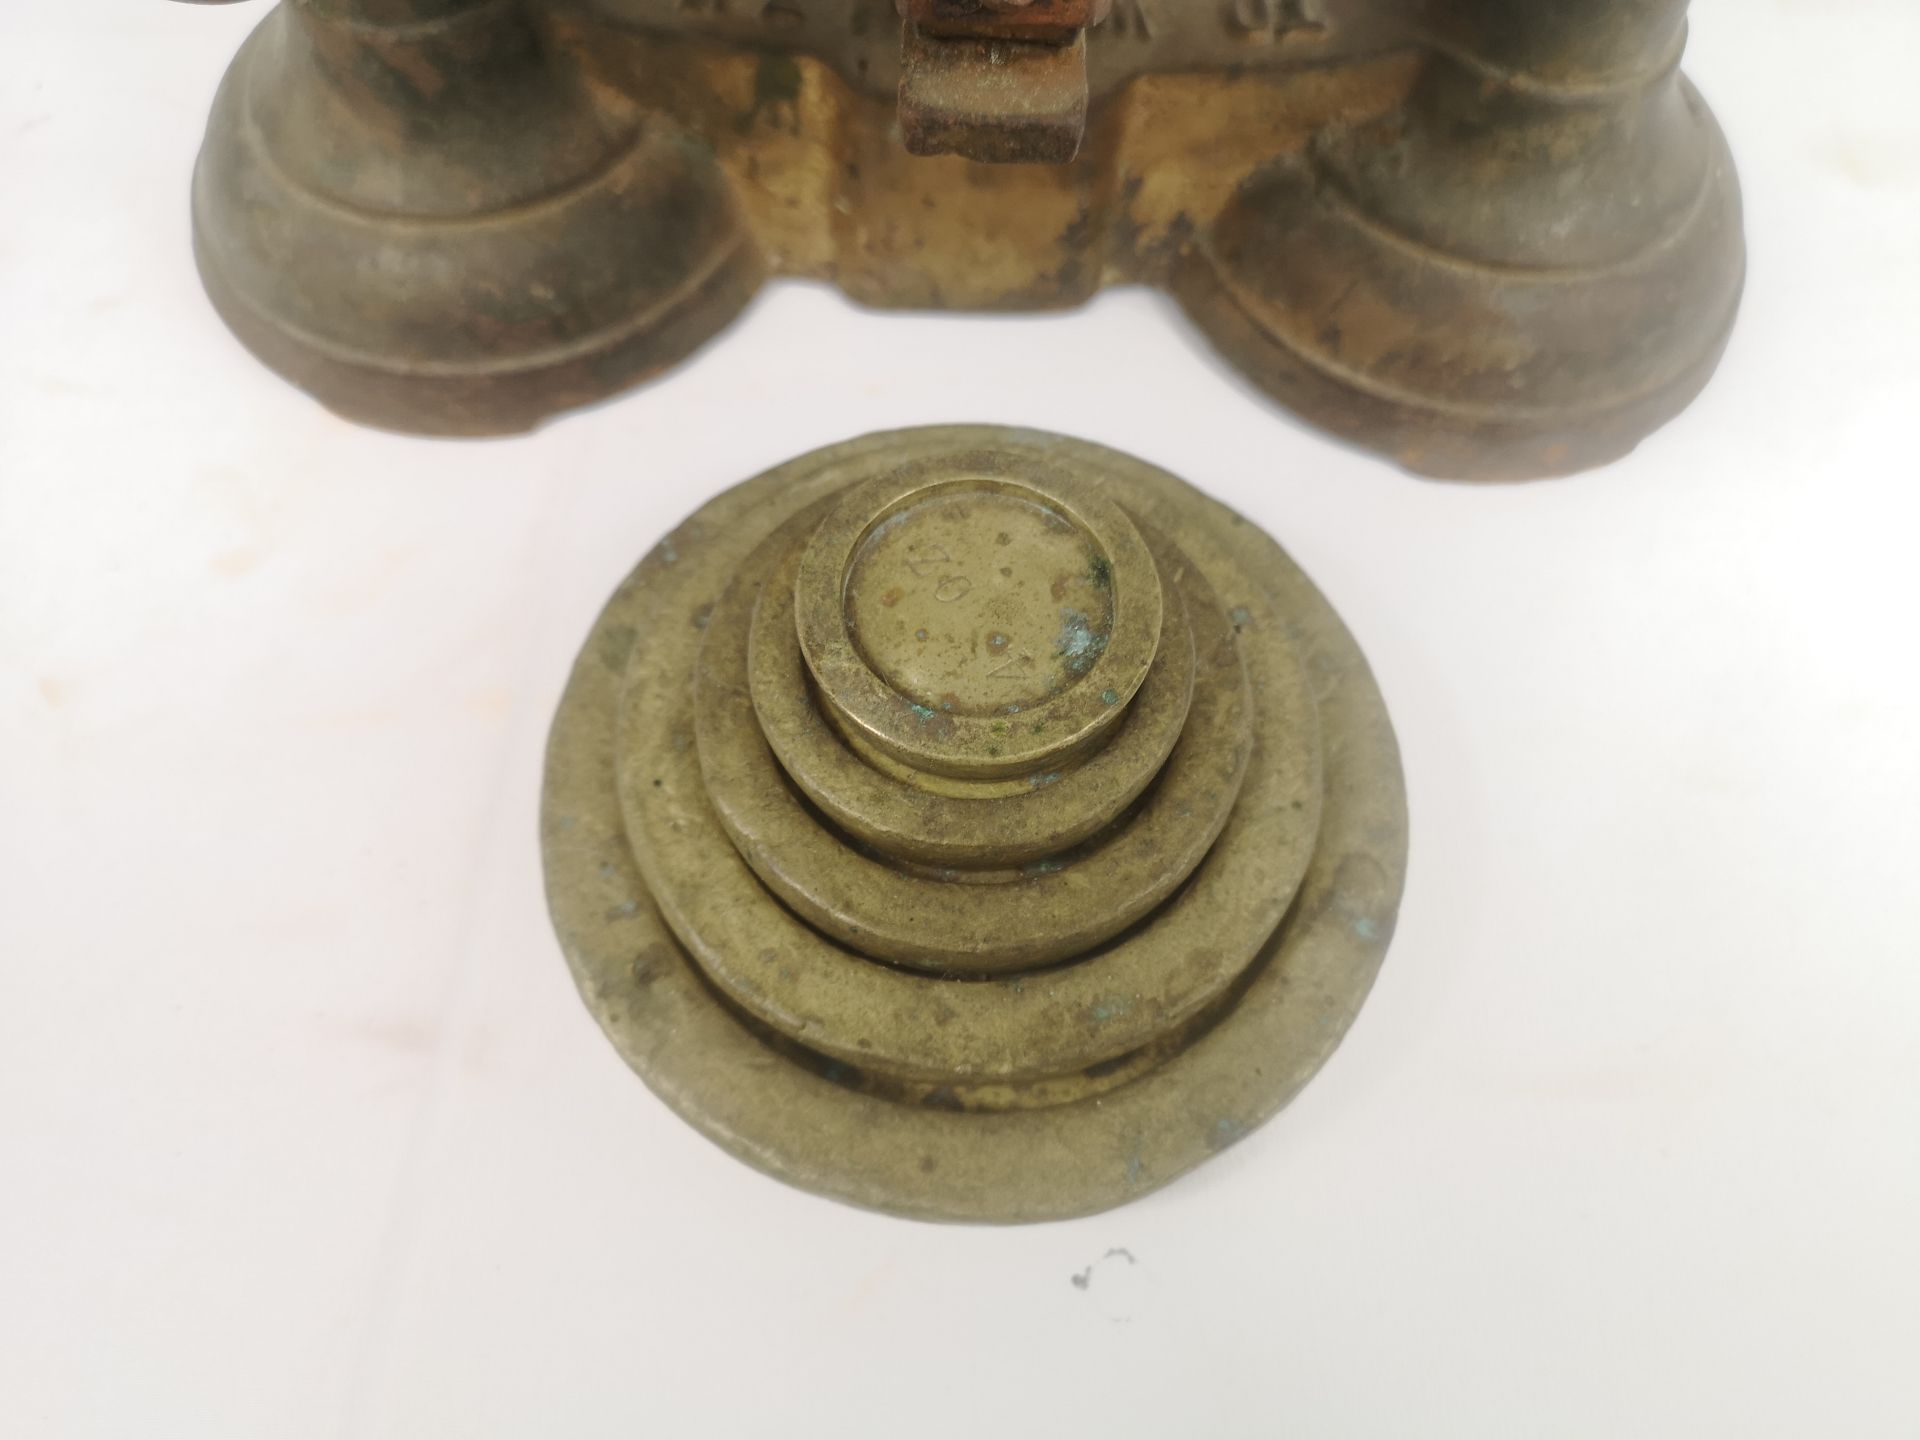 Cast iron weighing scales - Image 4 of 4